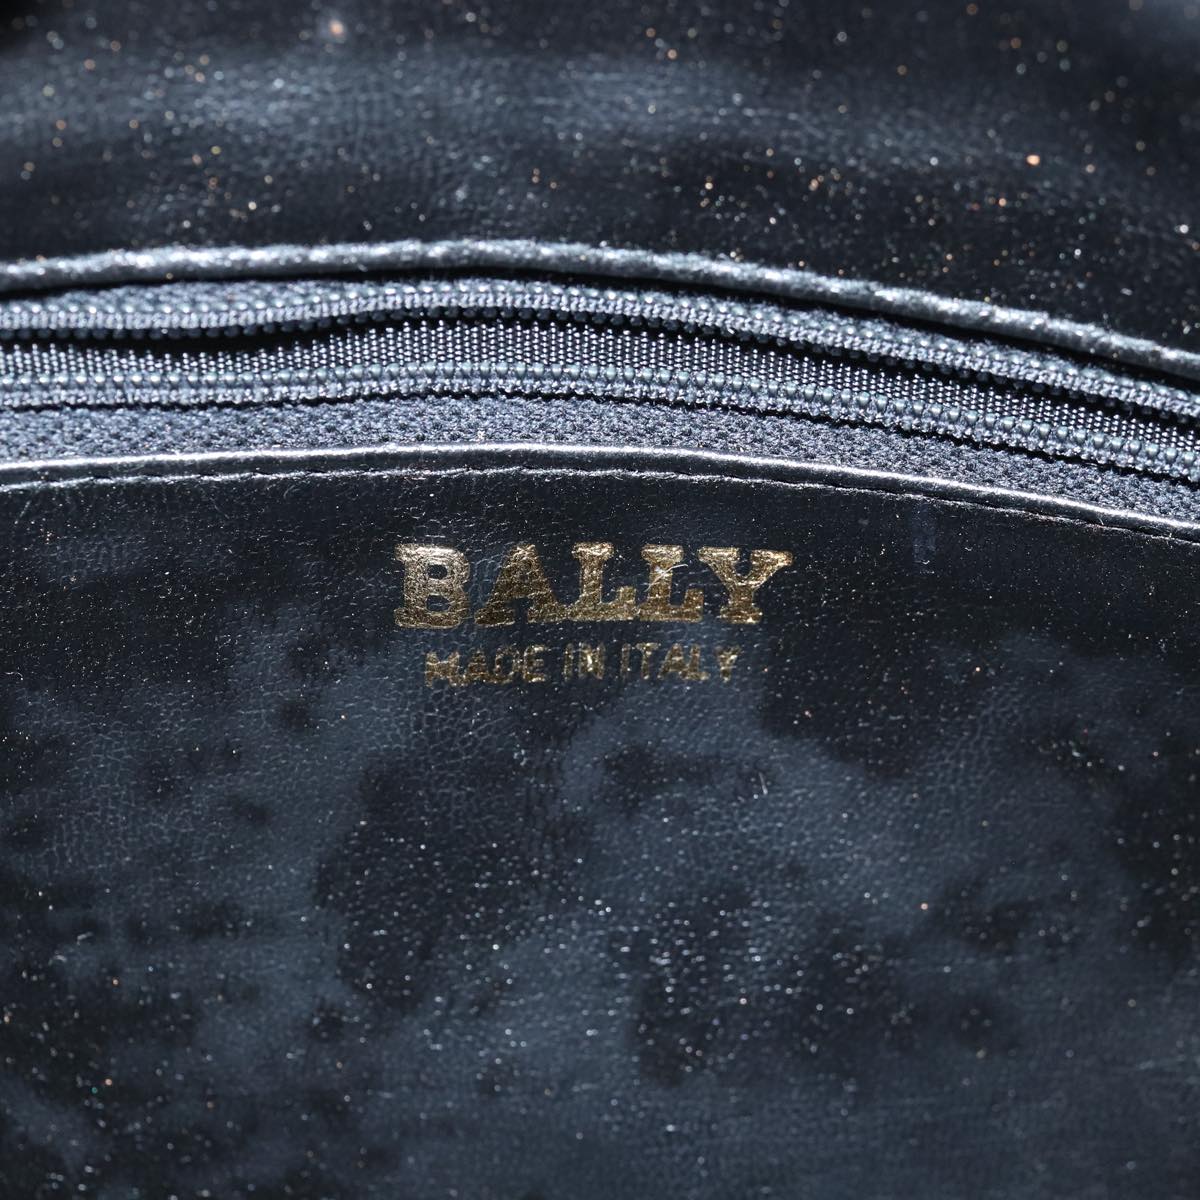 BALLY Hand Bag Patent leather Black Auth bs14103